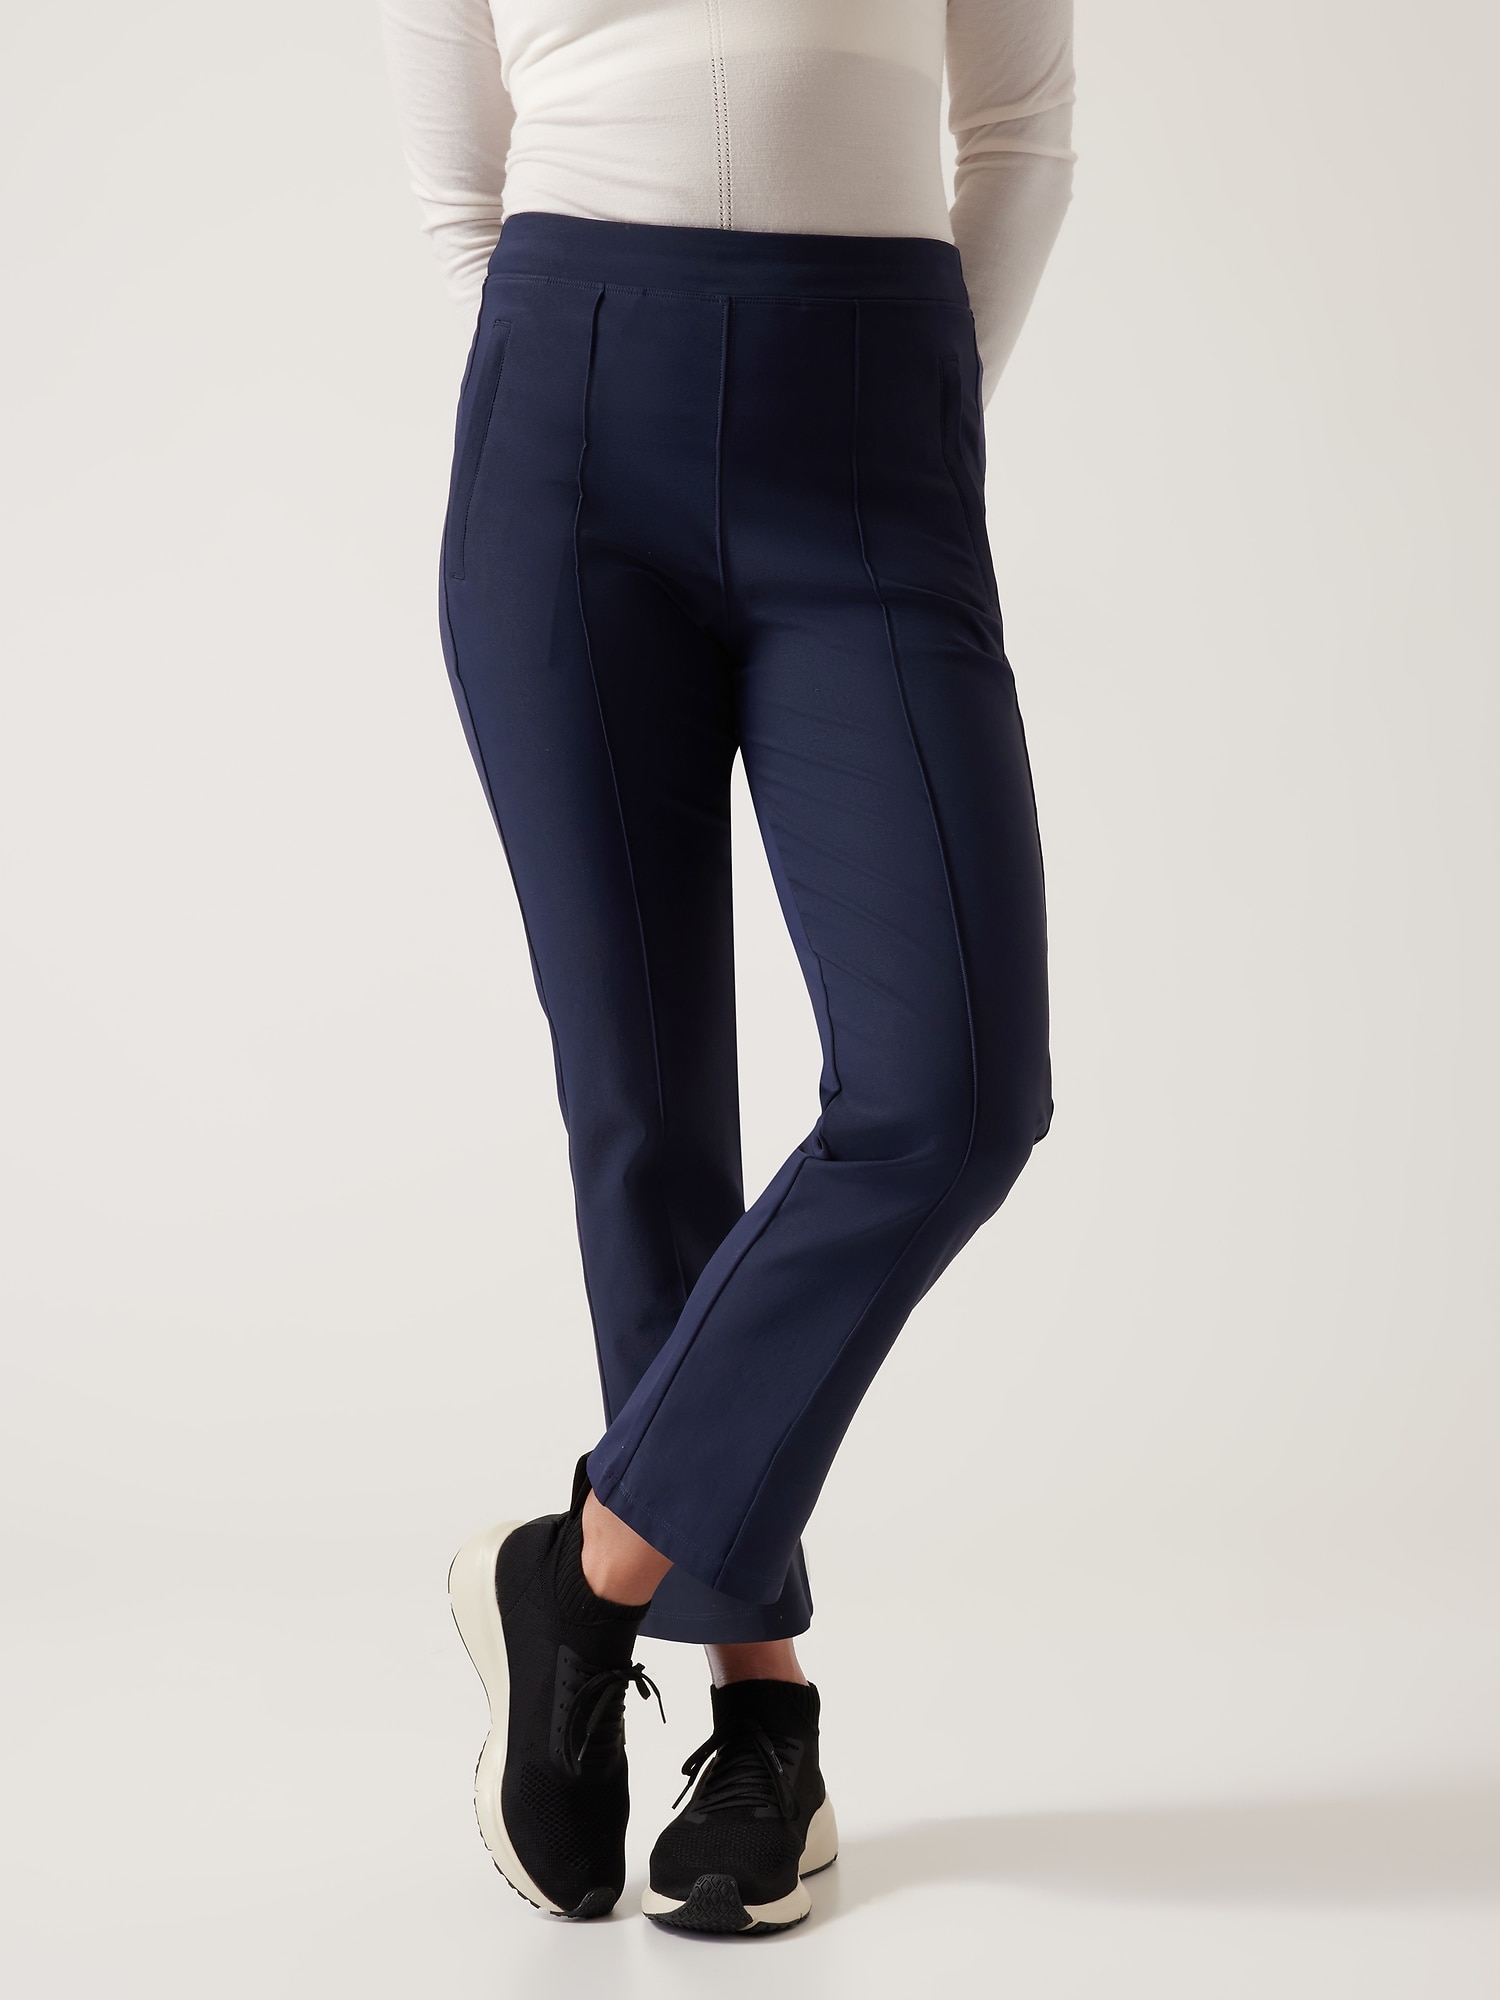 The Best Travel Pants: Athleta Headlands Hybrid Tight Review. Ethically and  sustainably made!, Fairly Southern